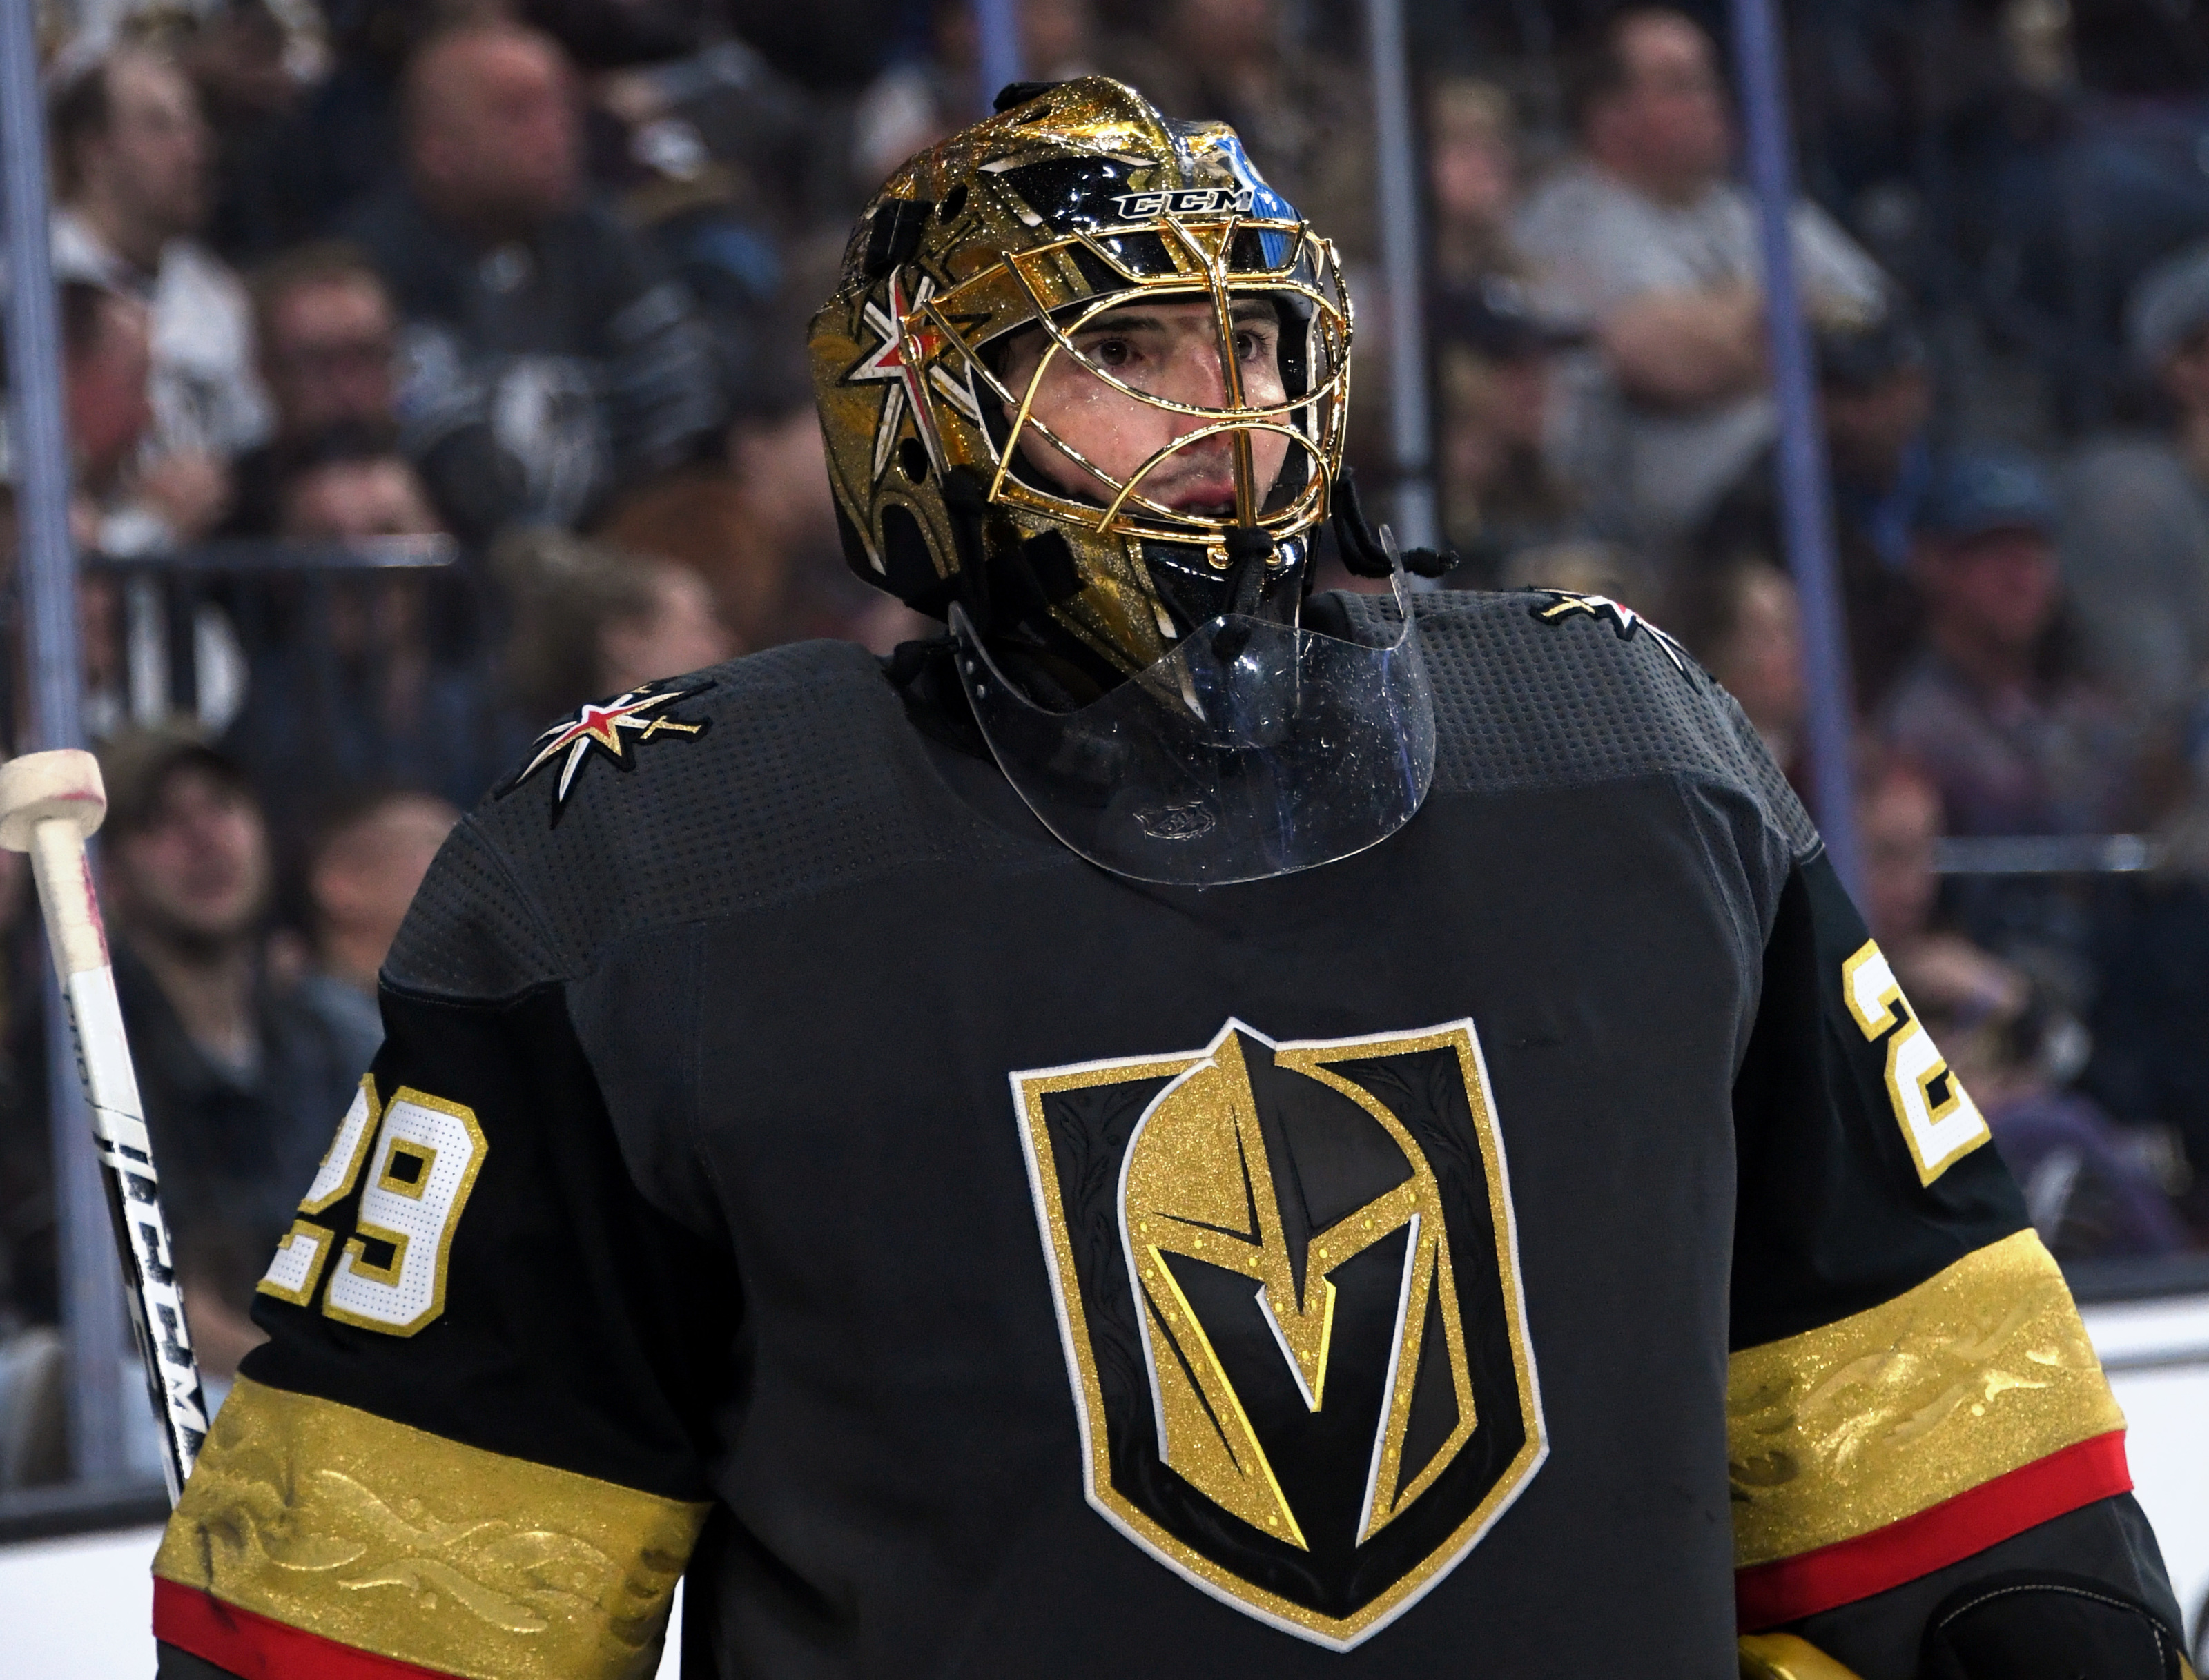 Marc-Andre Fleury opens up about trade from Golden Knights in new interview